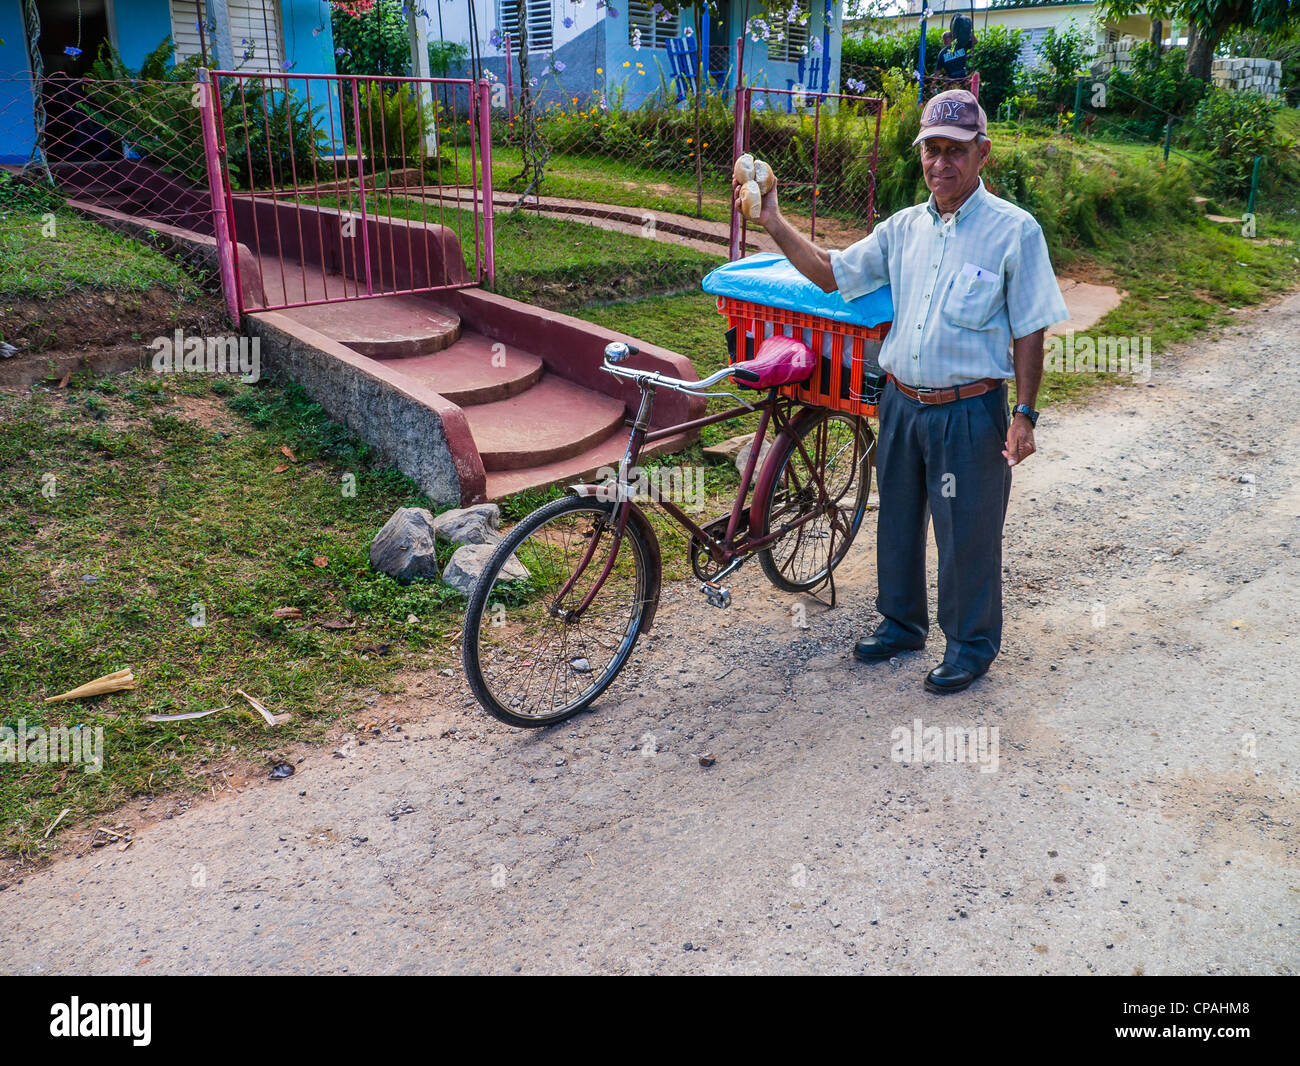 A Cuban Hispanic bread vendor holds freshly baked rolls in his hand as he delivers them on his bicycle in rural Viñales, Cuba. Stock Photo